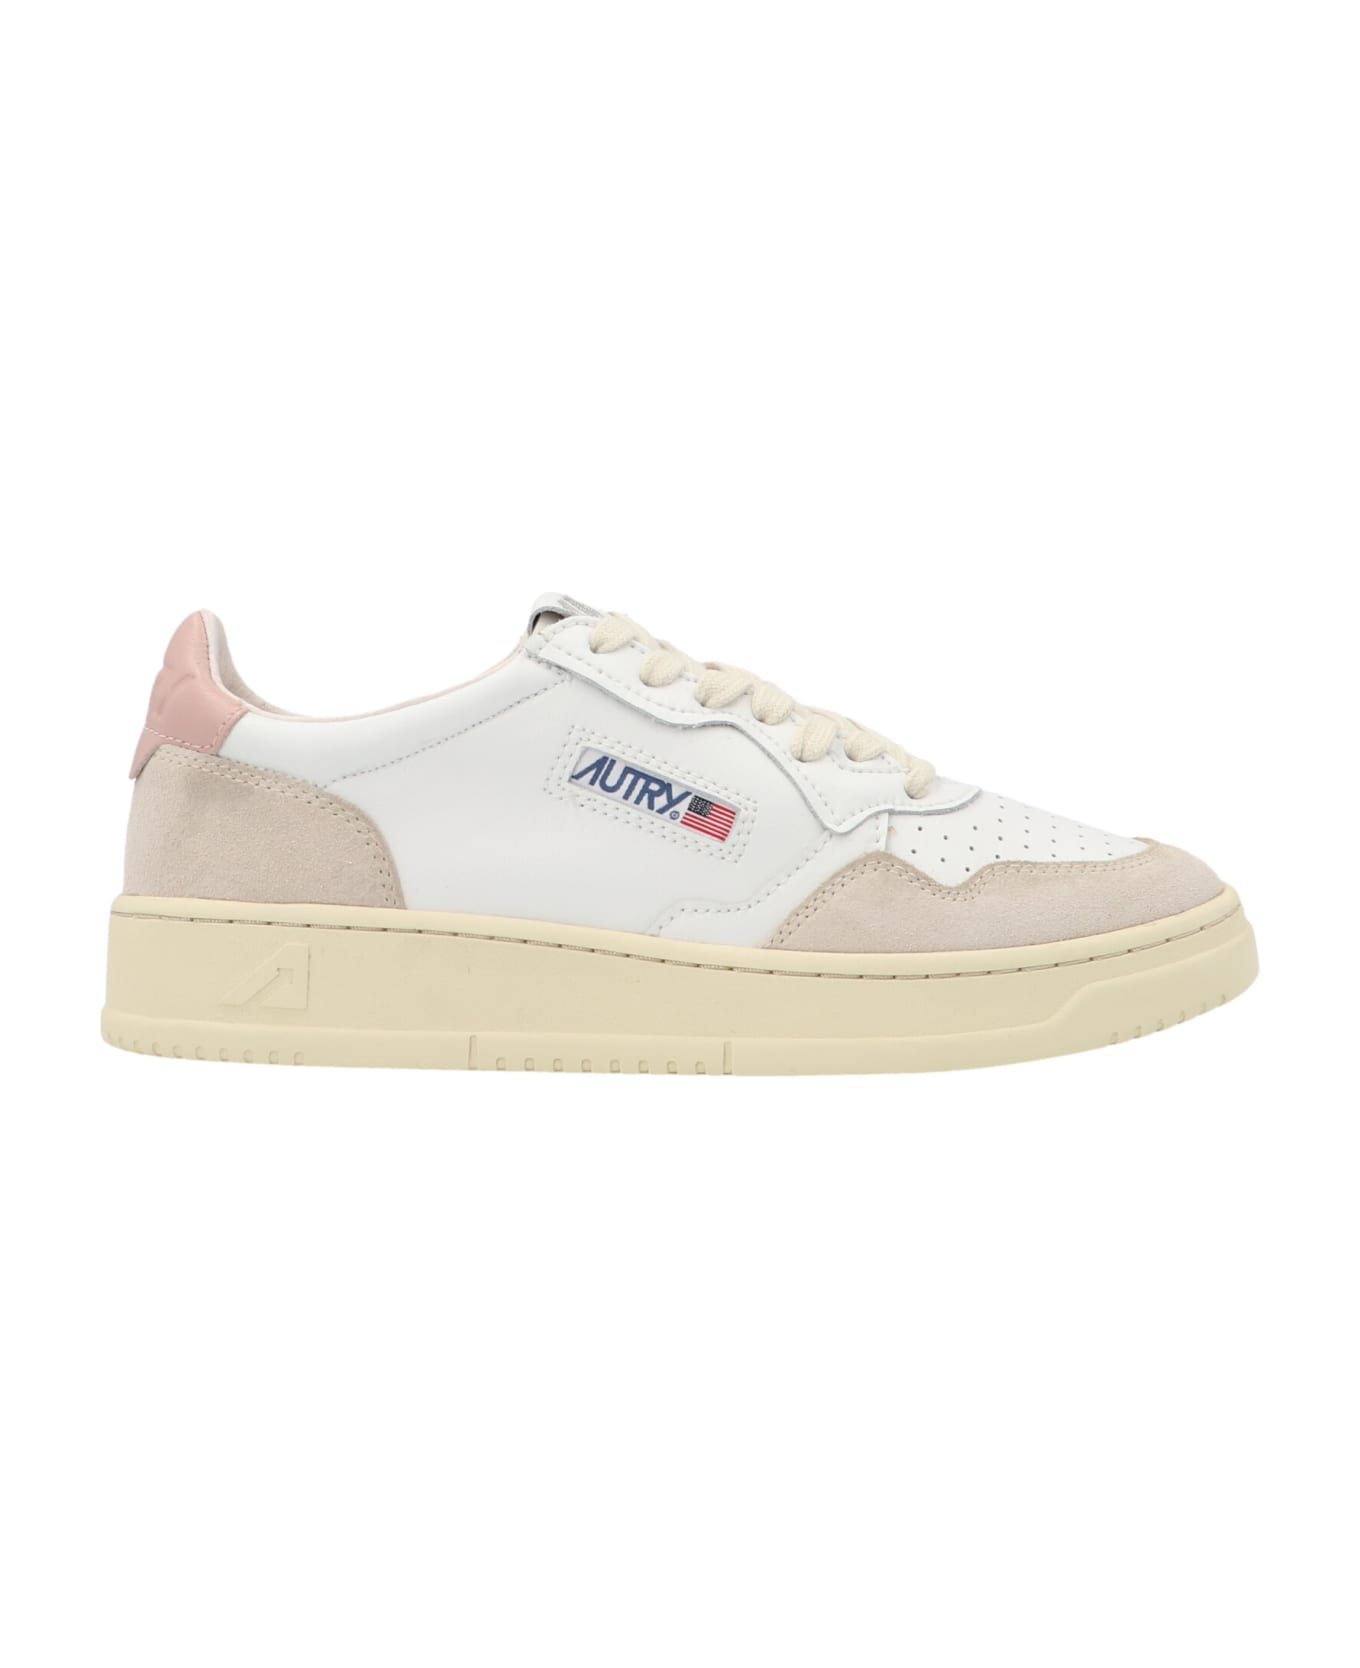 Autry Medalist Low Sneakers In White And Powder Suede And Leather - Bianco